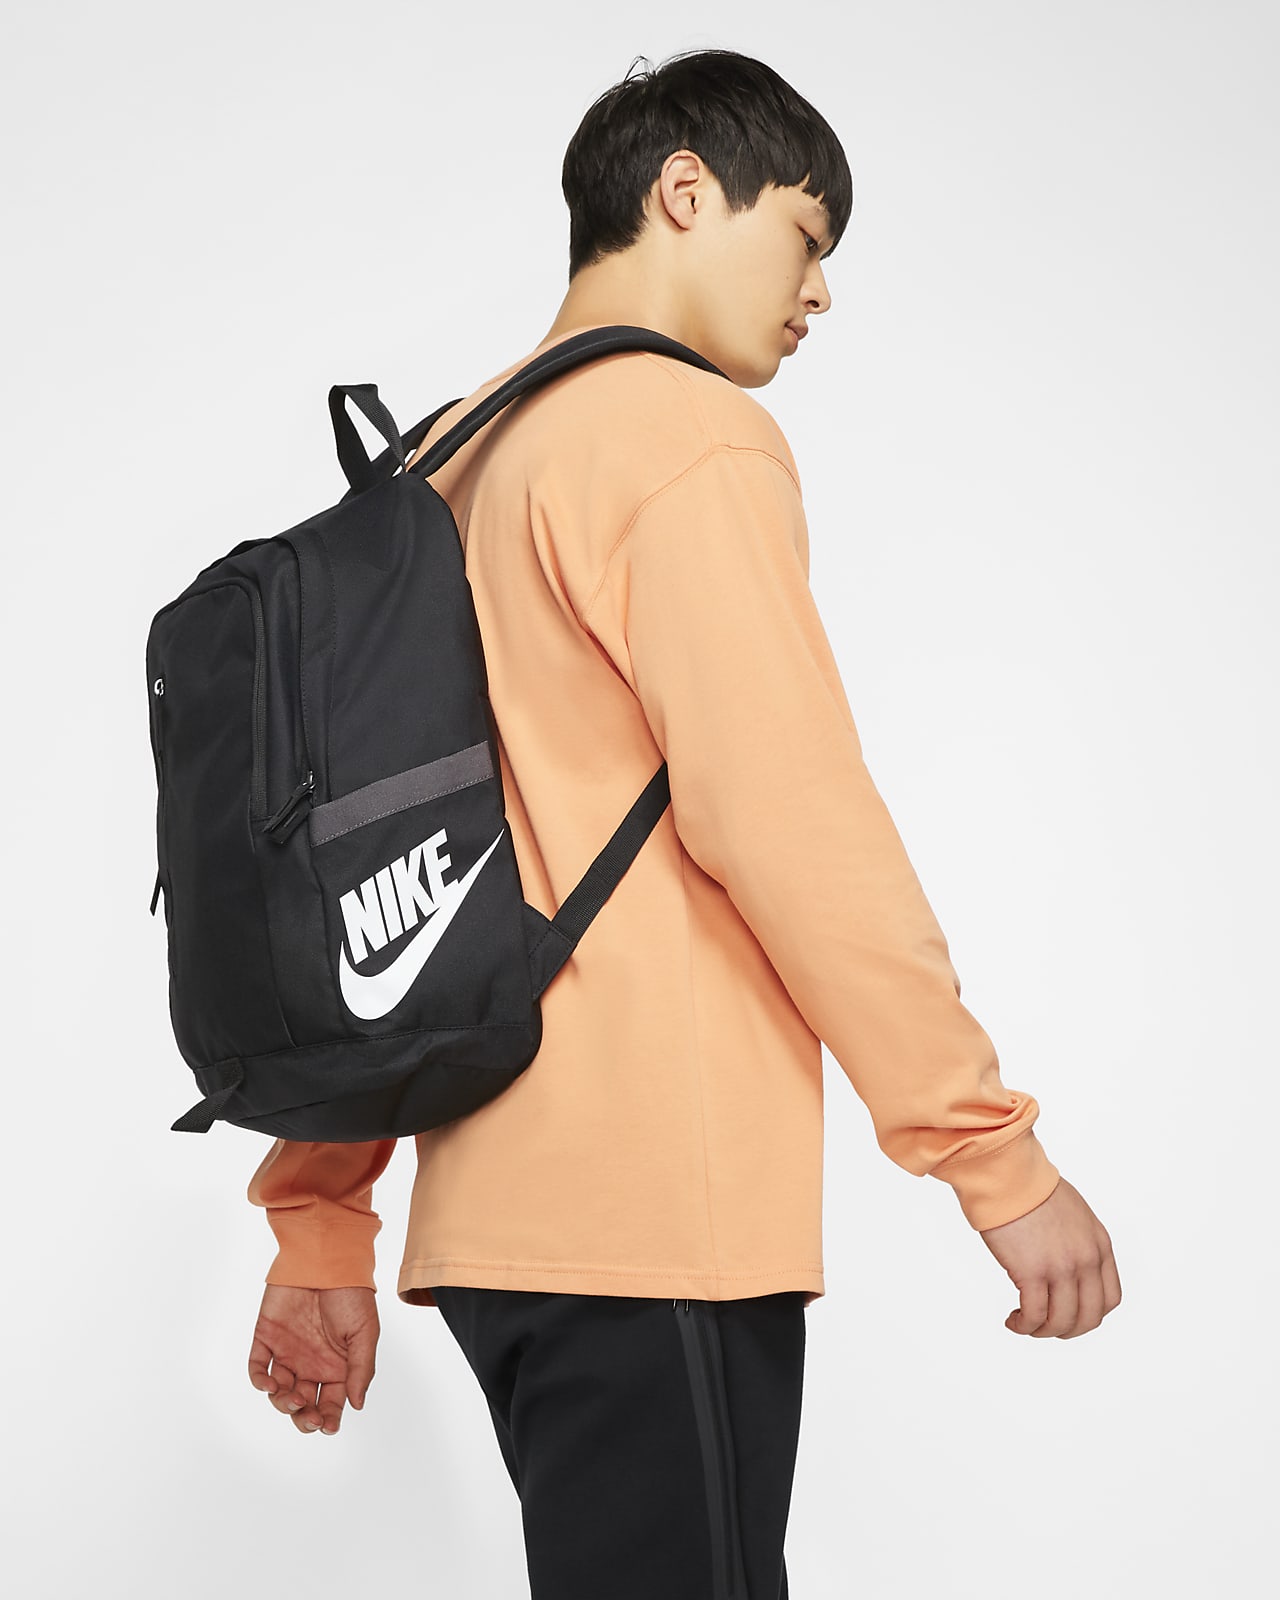 nike all day access soleday backpack